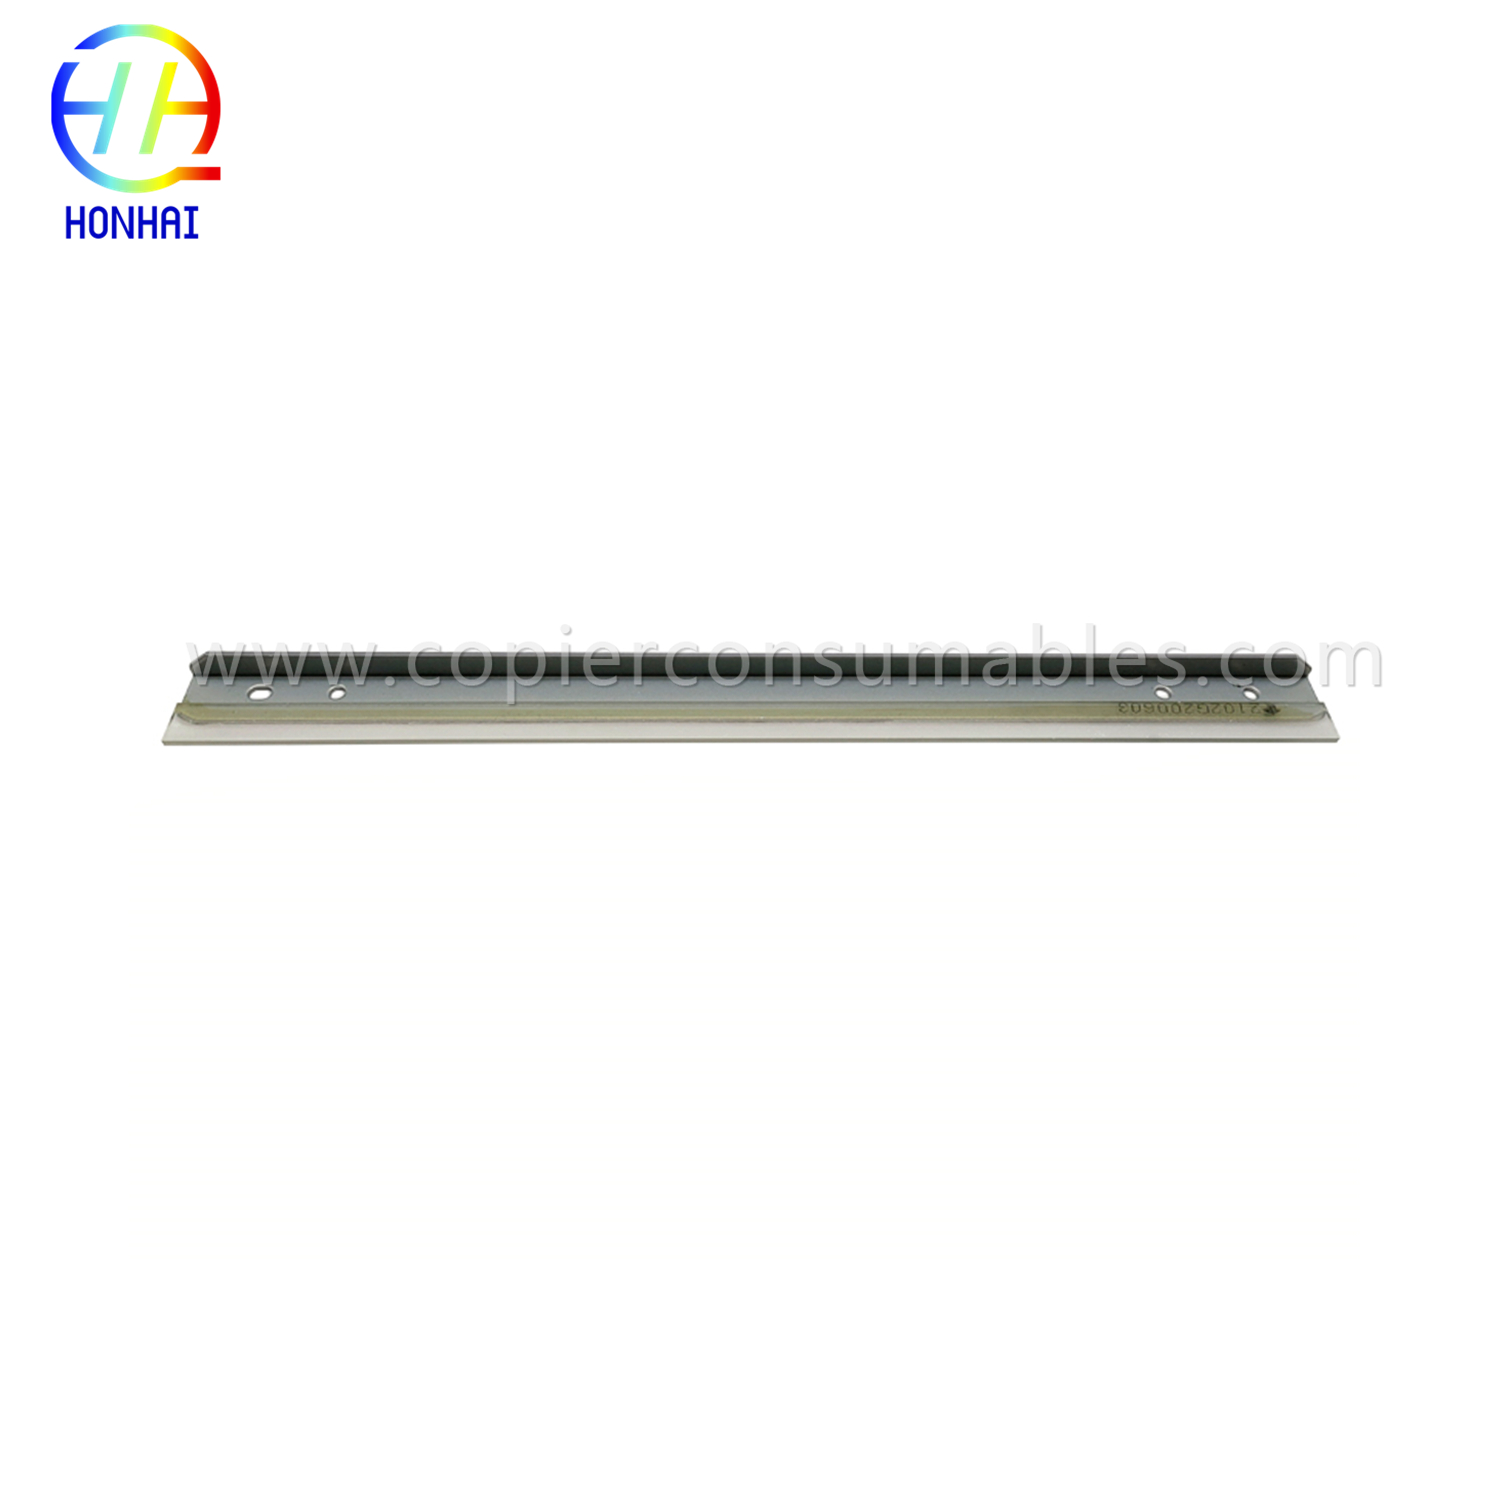 Transfer Belt Cleaning Blade for Ricoh MP 4000 5000 4001 5002